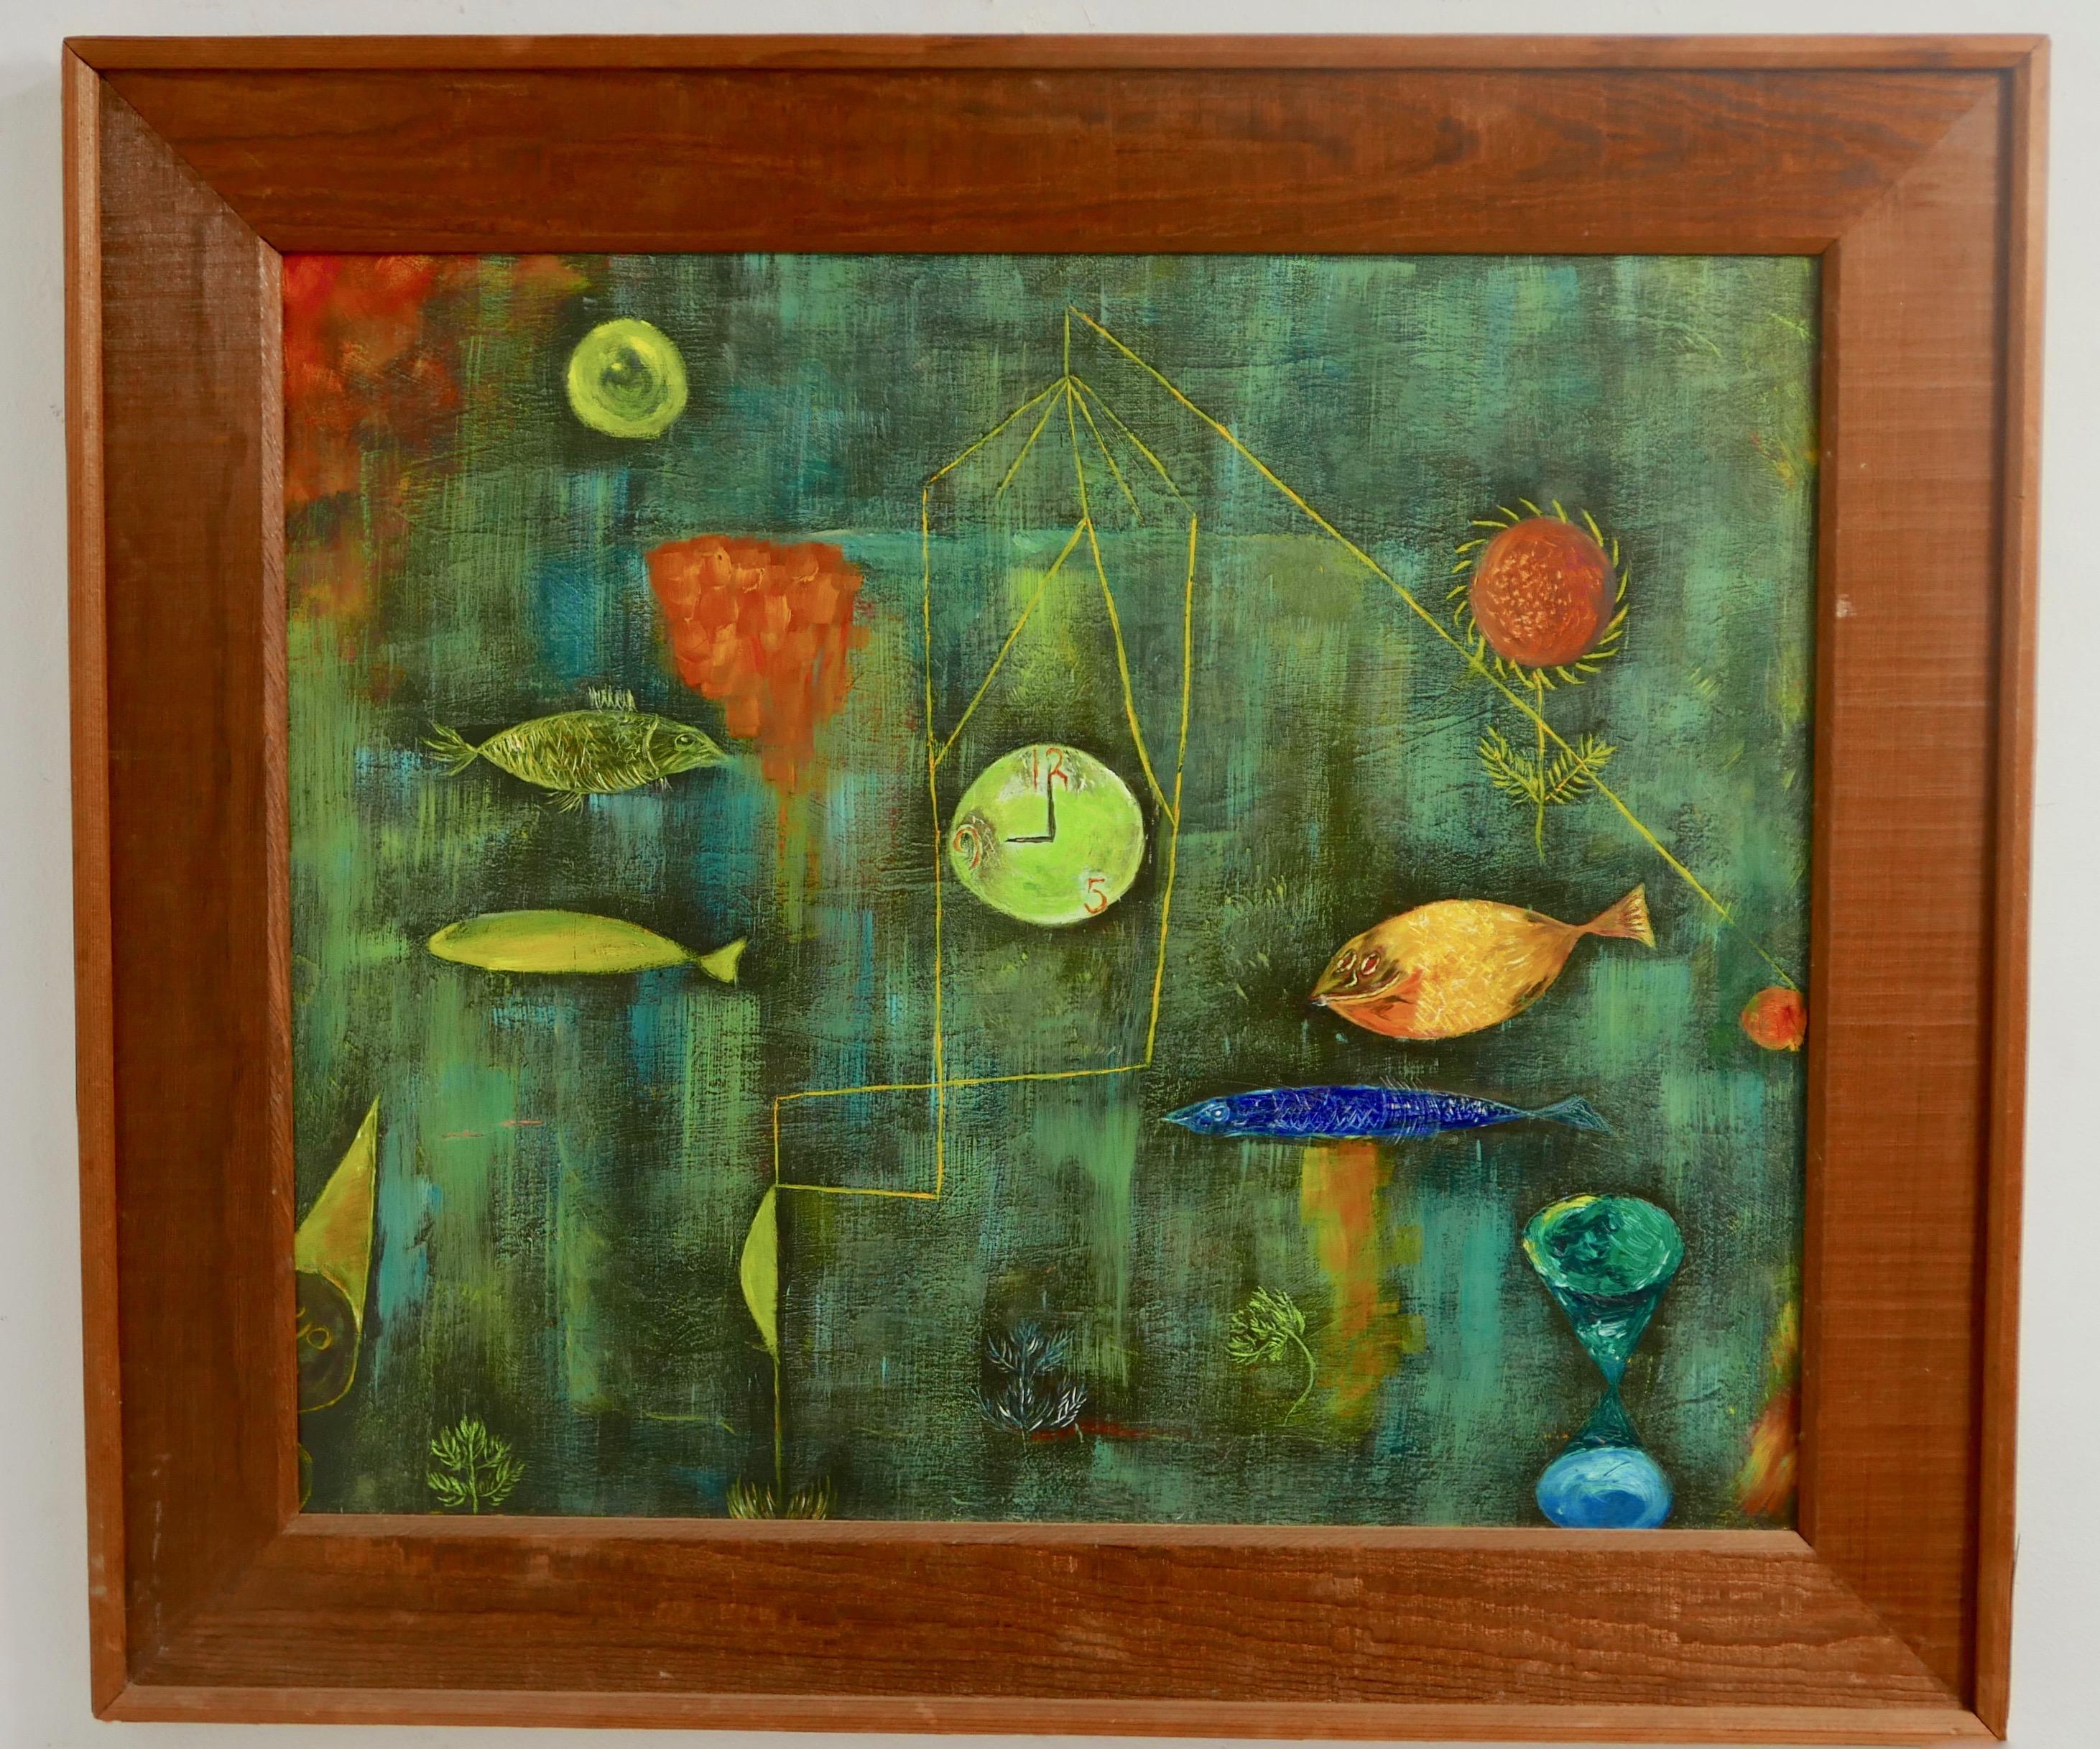  American Dreamlike Surrealist / Abstract Underwater Painting in Rustic Frame For Sale 2